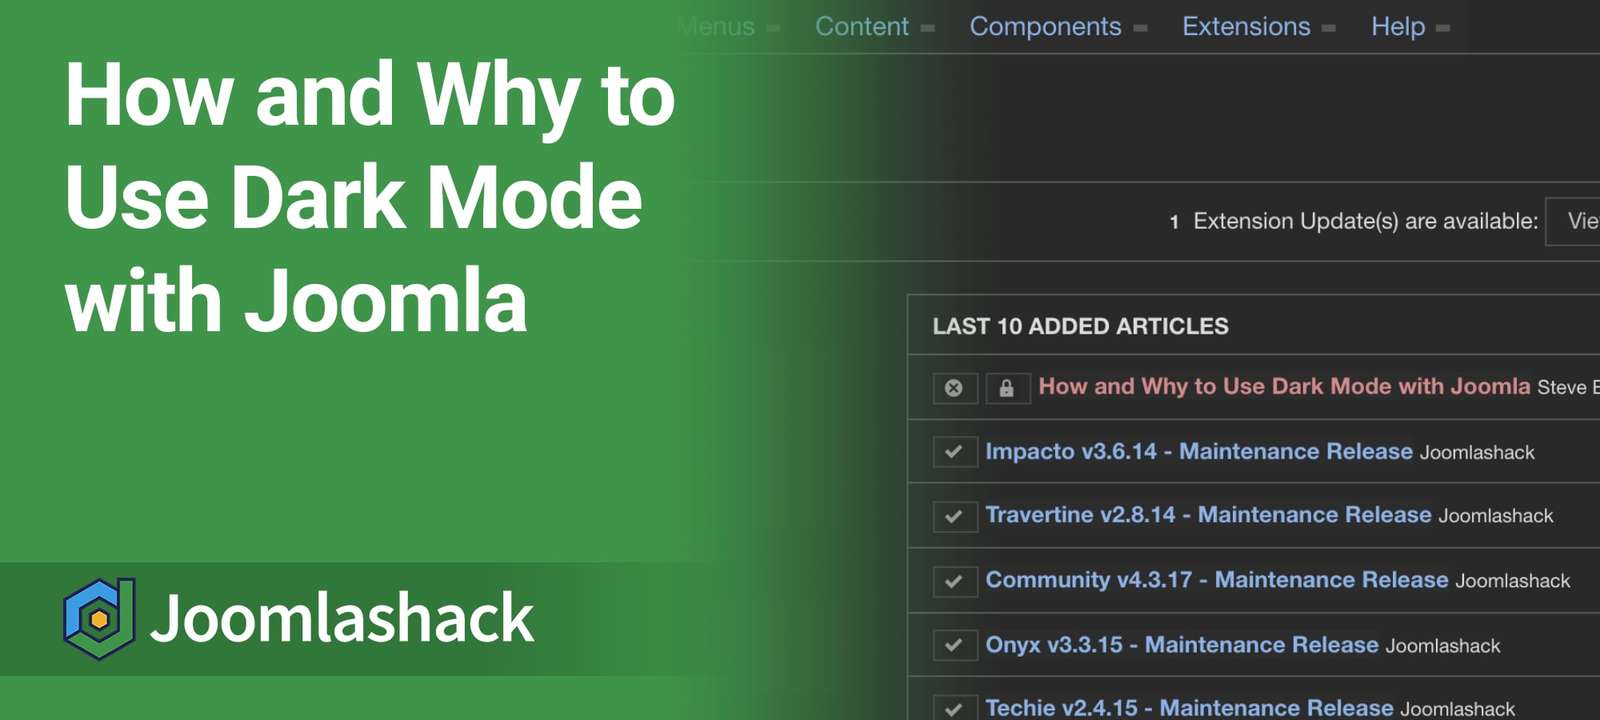 How and Why to Use Dark Mode with Joomla